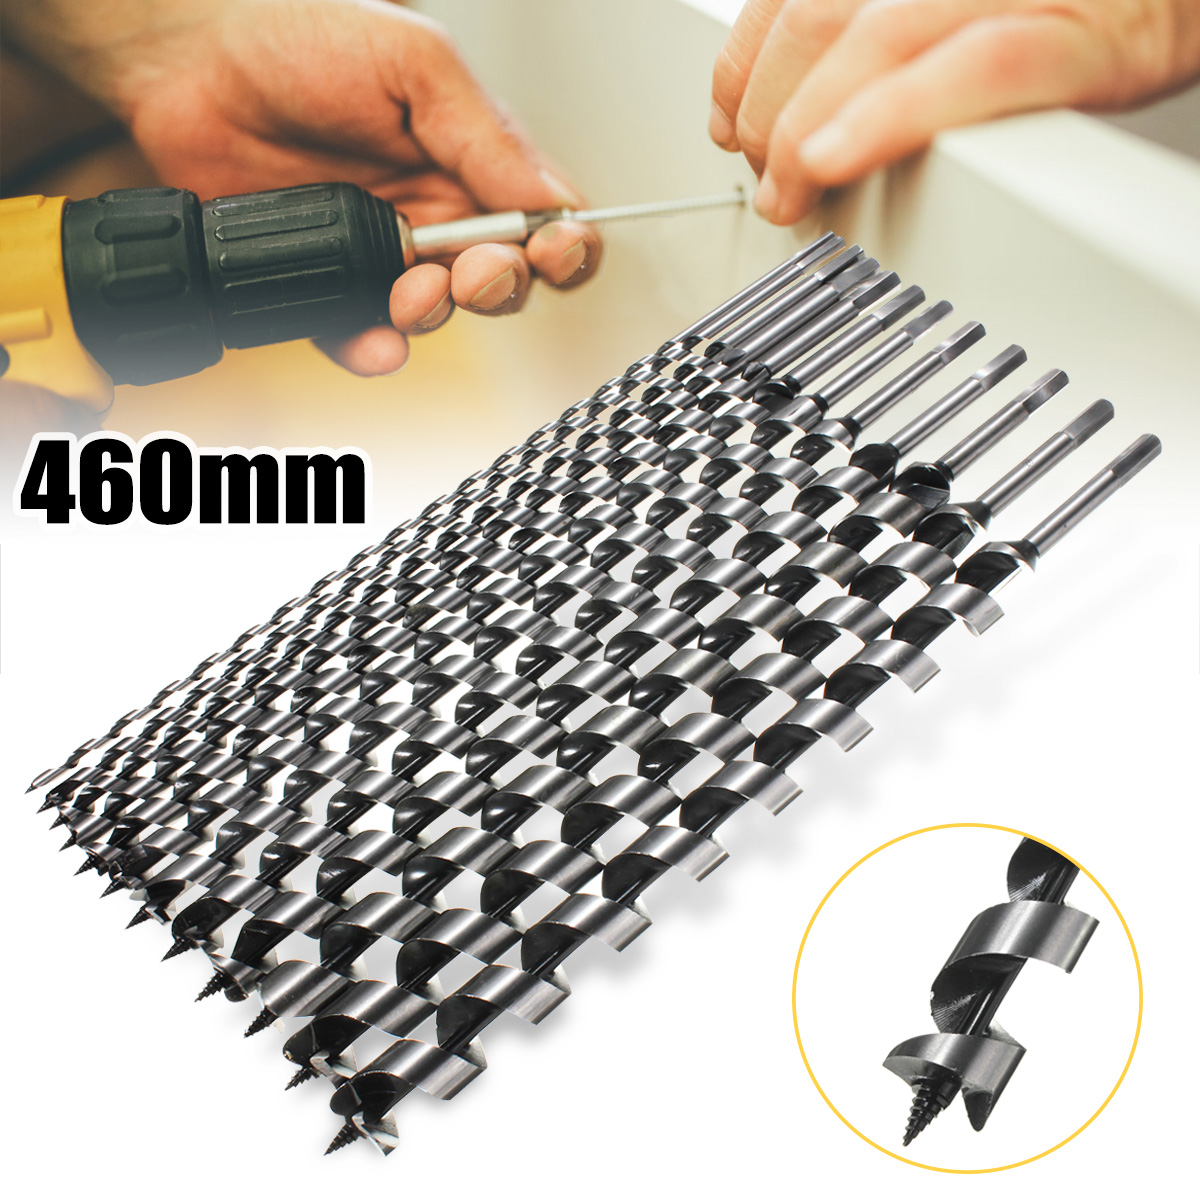 460mm Long 6-28mm Auger Drill Bits Wood Carpenter Masonry Hobby Wood Drills Set for woodworking